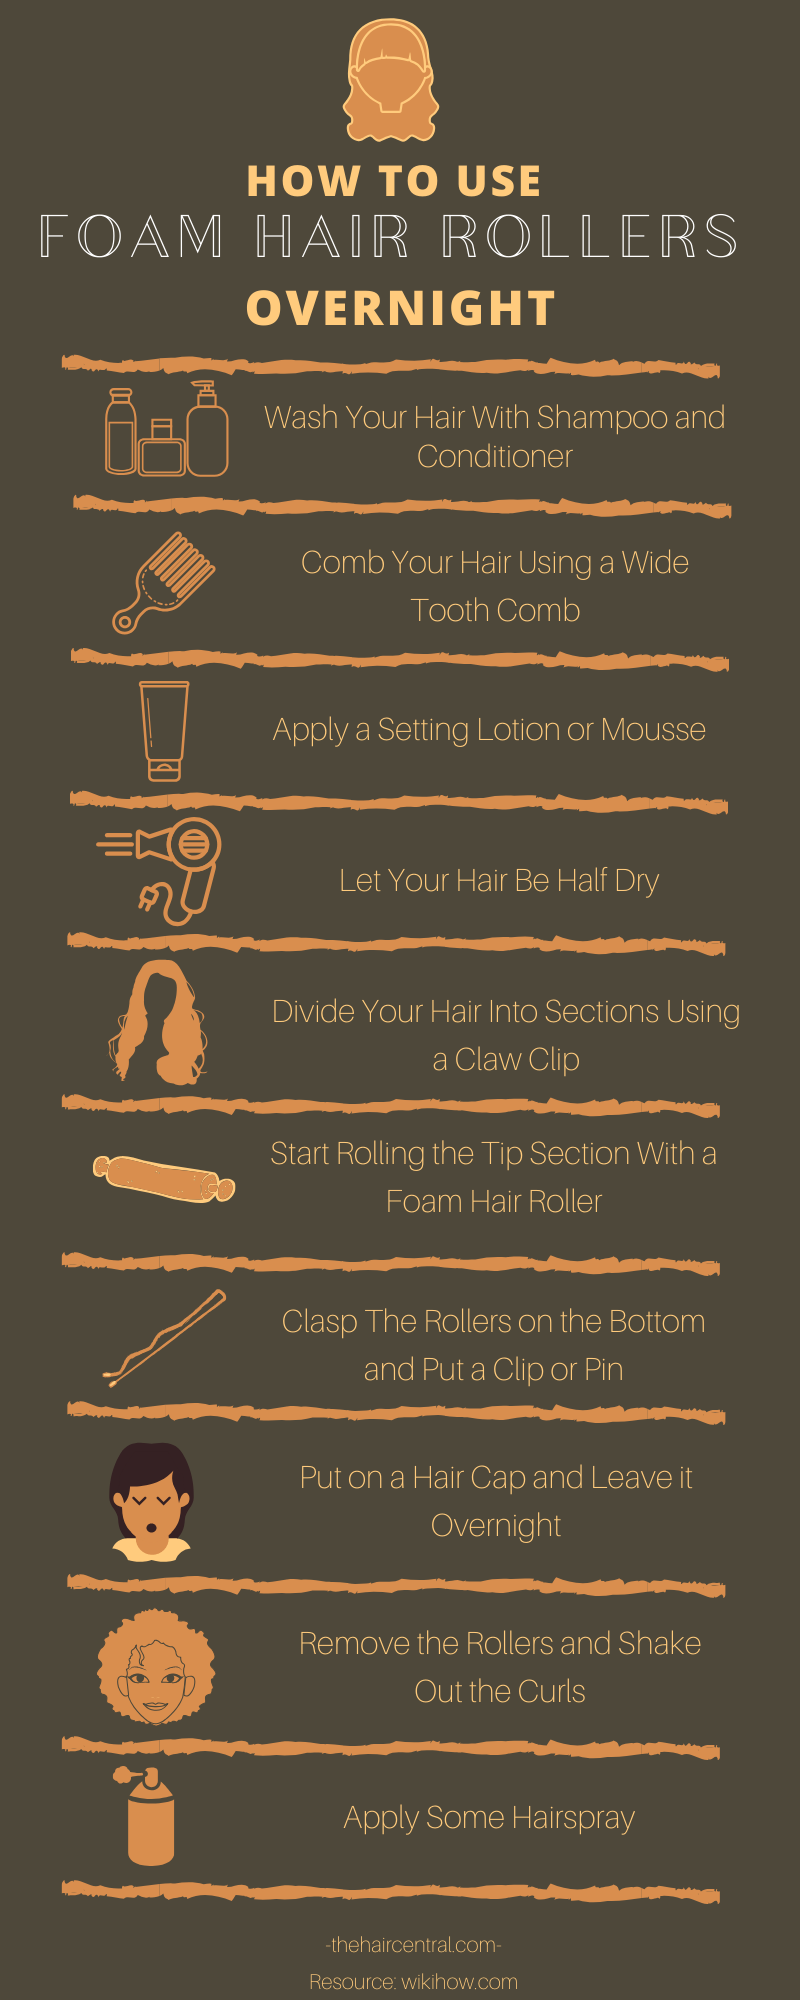 how to use foam hair rollers overnight